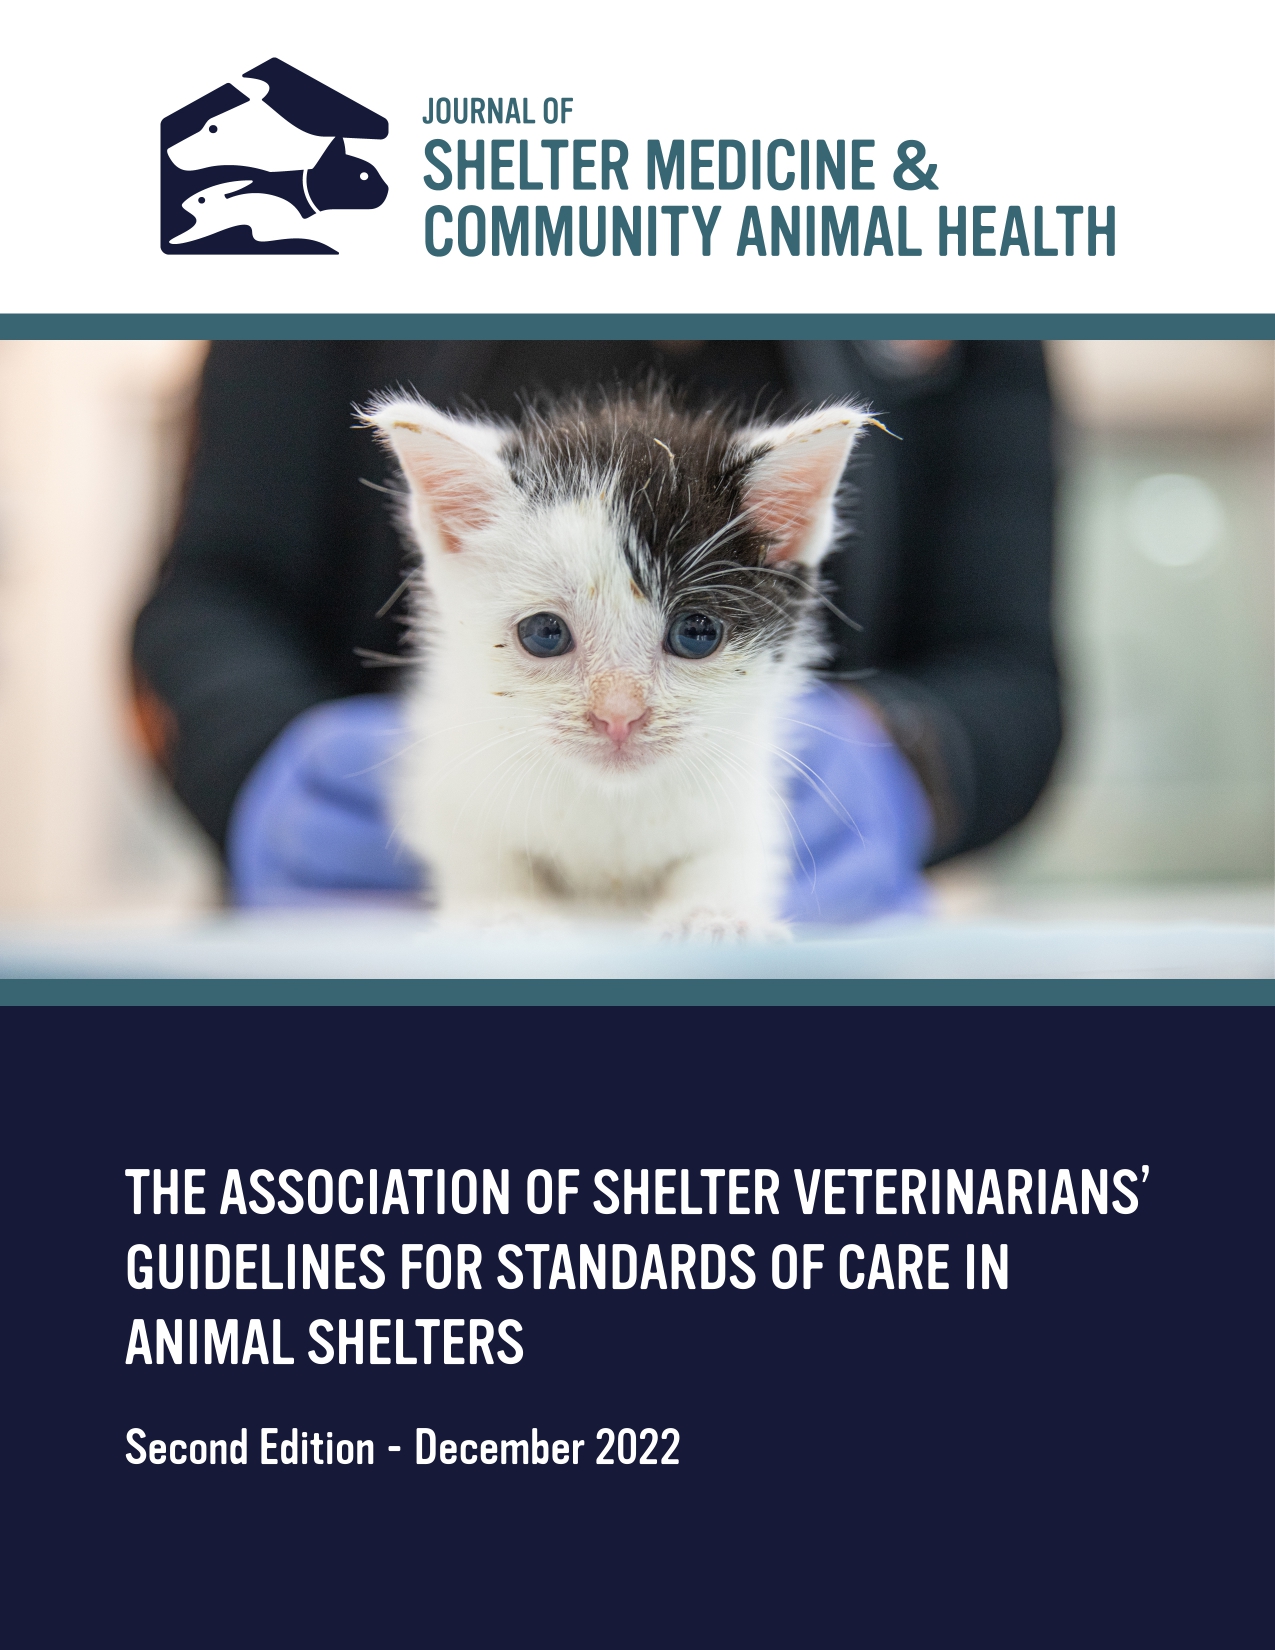 					View Vol. 1 No. 2: The Guidelines for Standards of Care in Animal Shelters, Second Edition
				